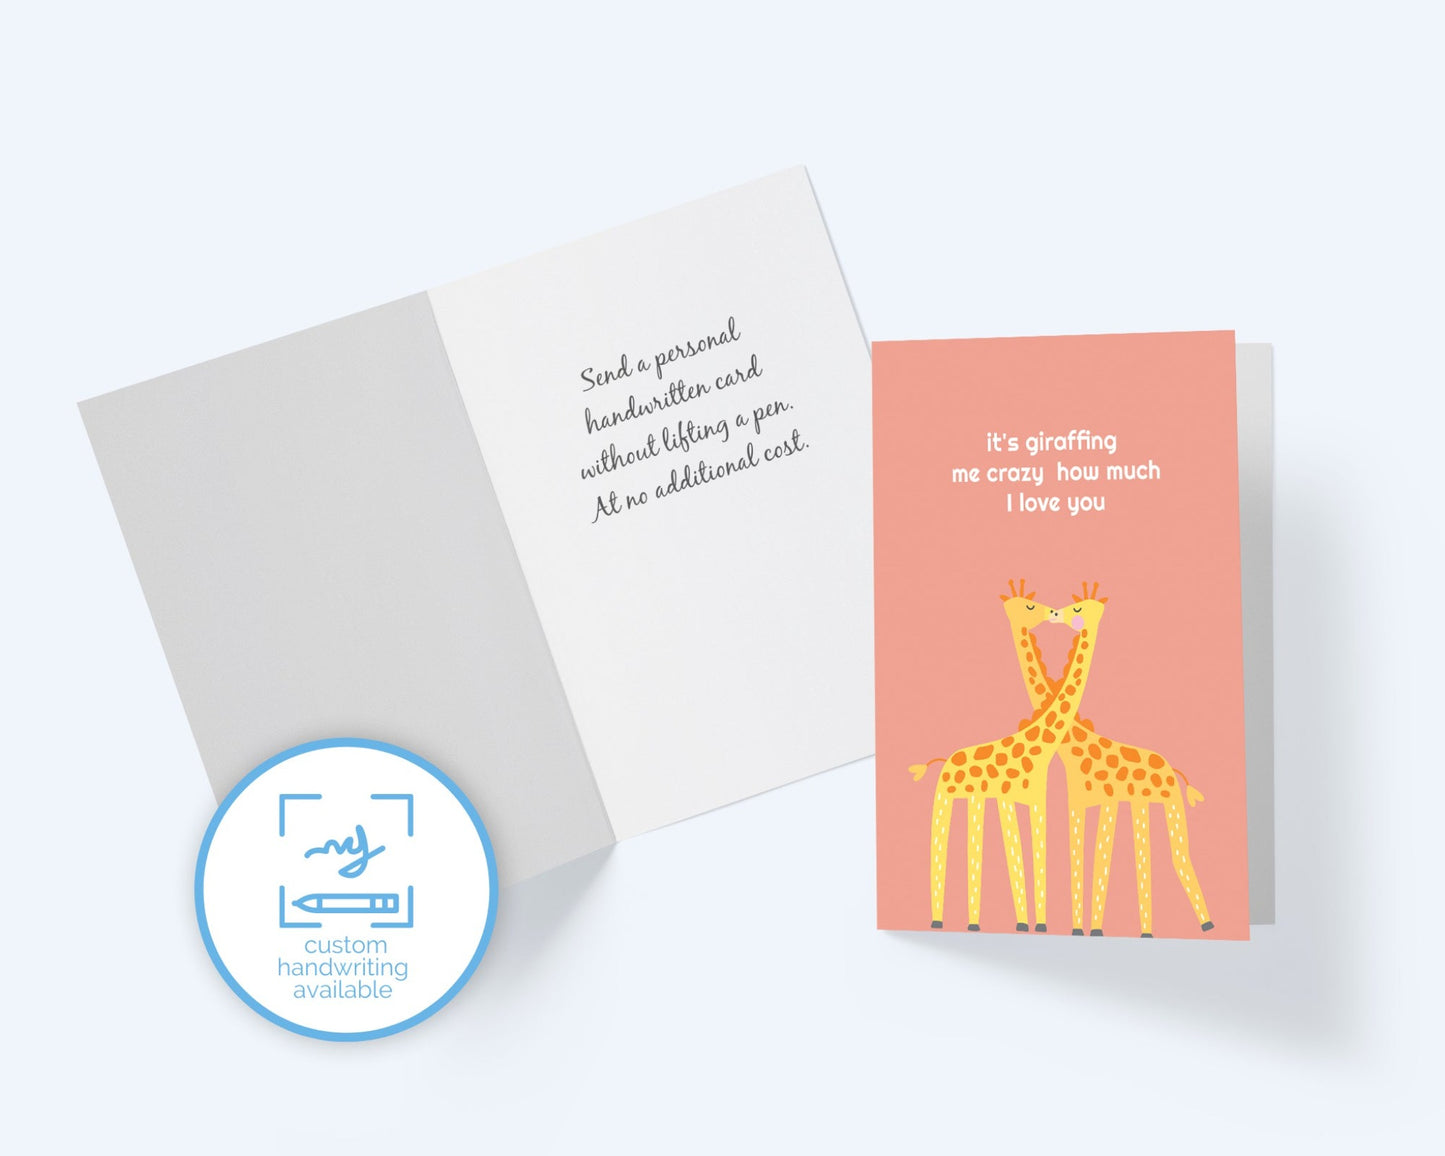 Valentine's Day Cards: It's Giraffing Me Crazy How Much I Love You